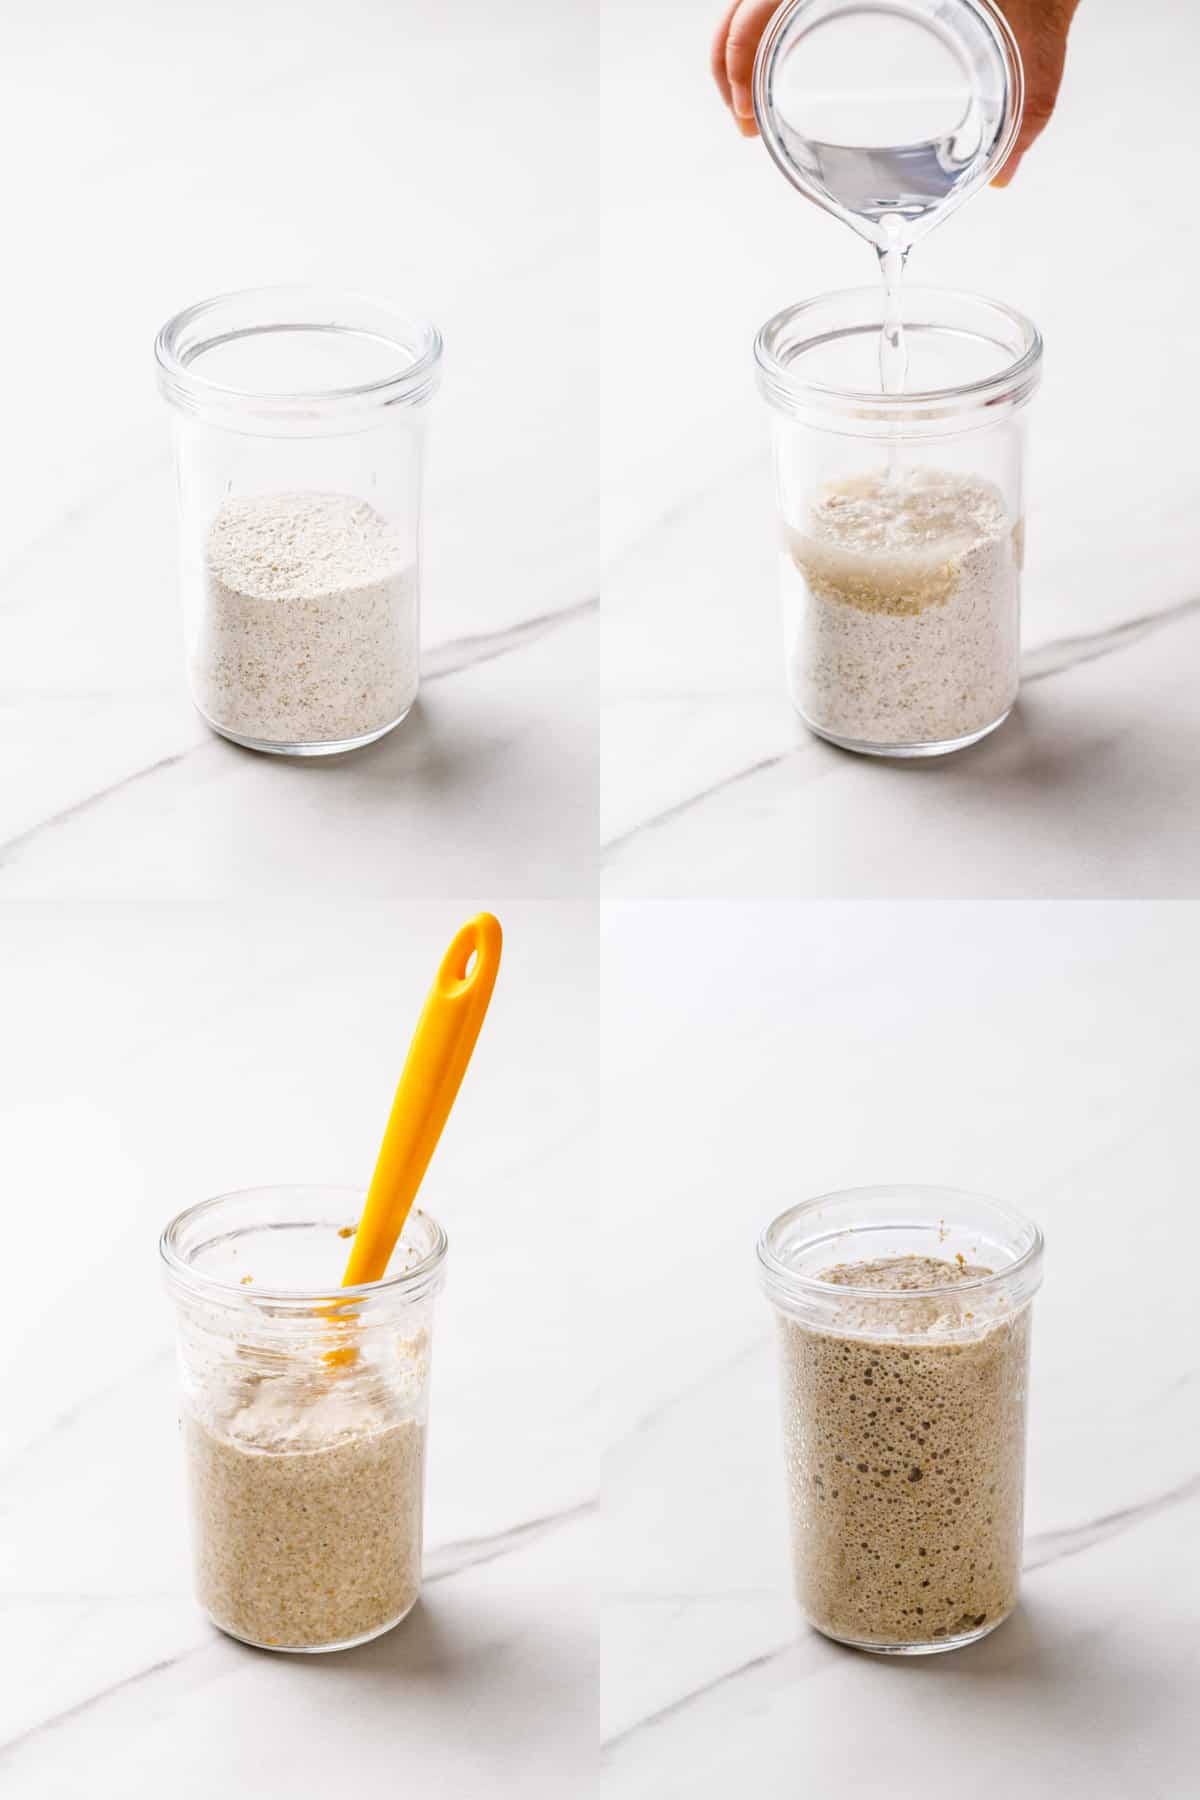 steps to make sourdough starter day by day